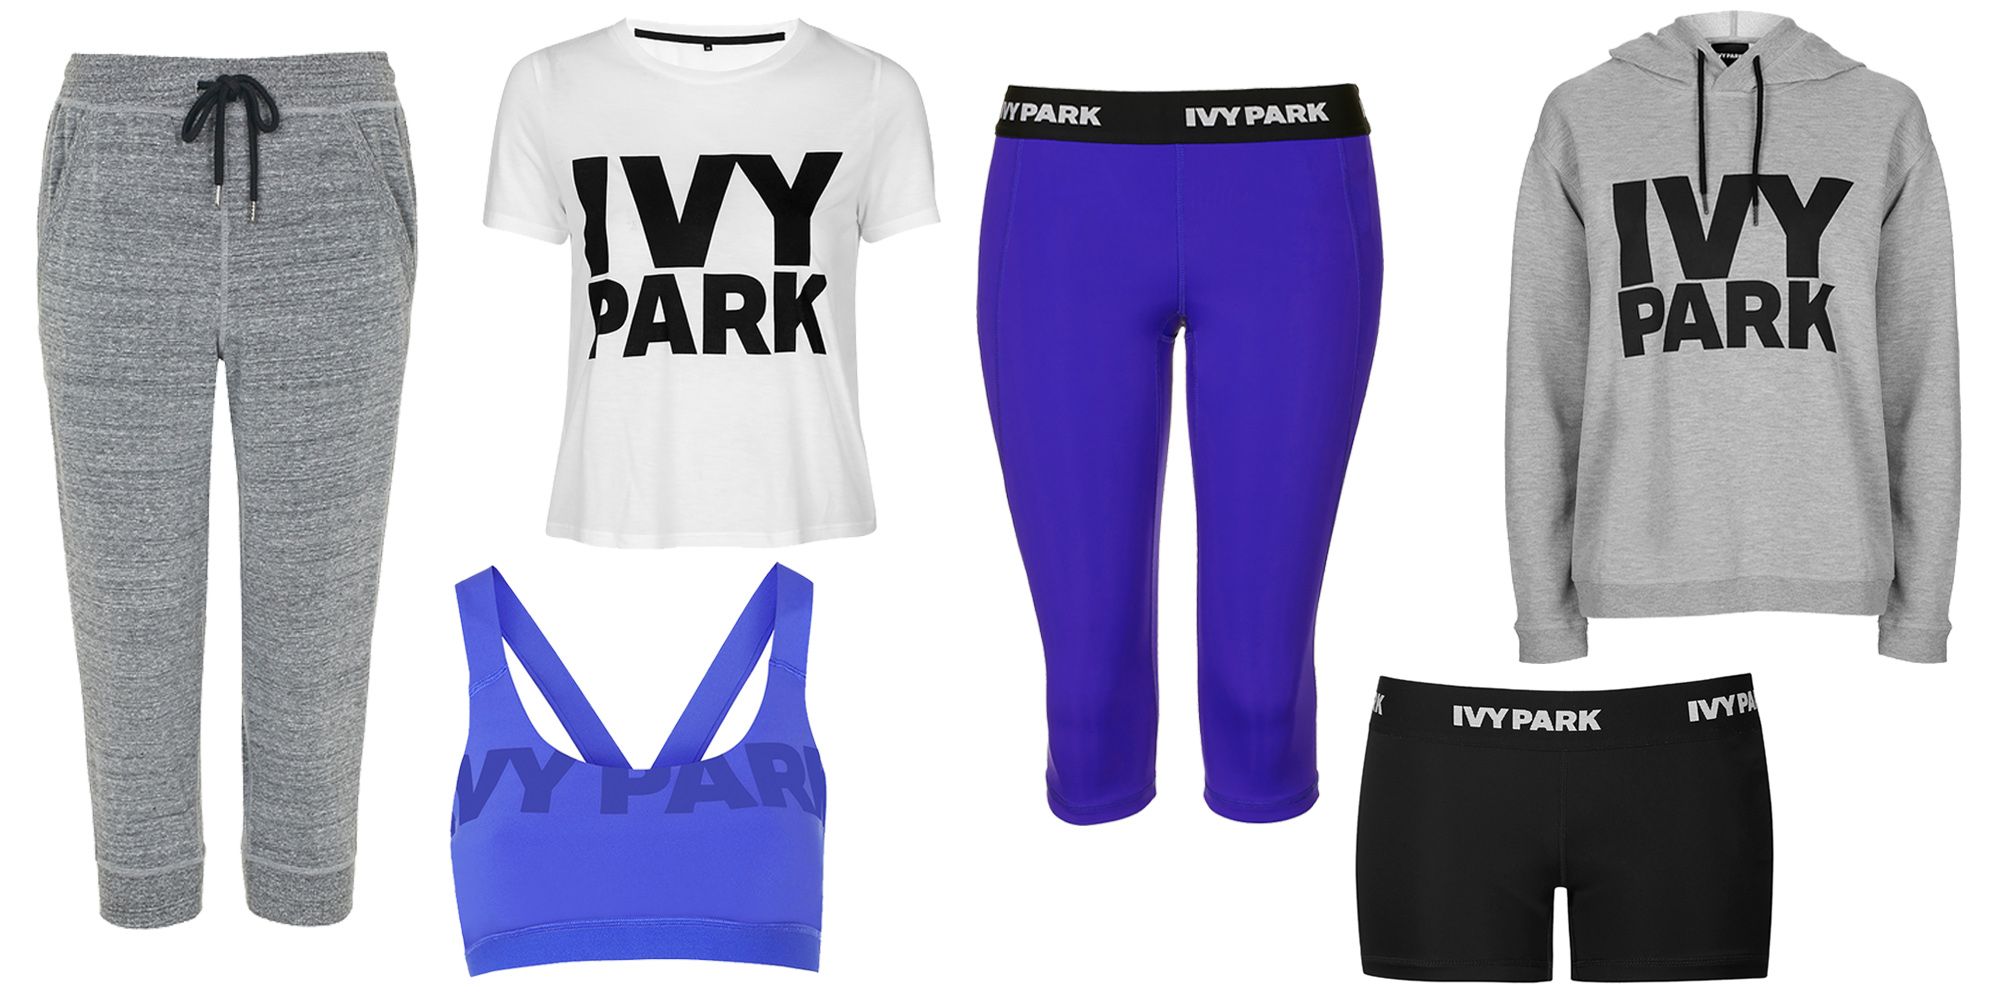 where can you buy ivy park clothing